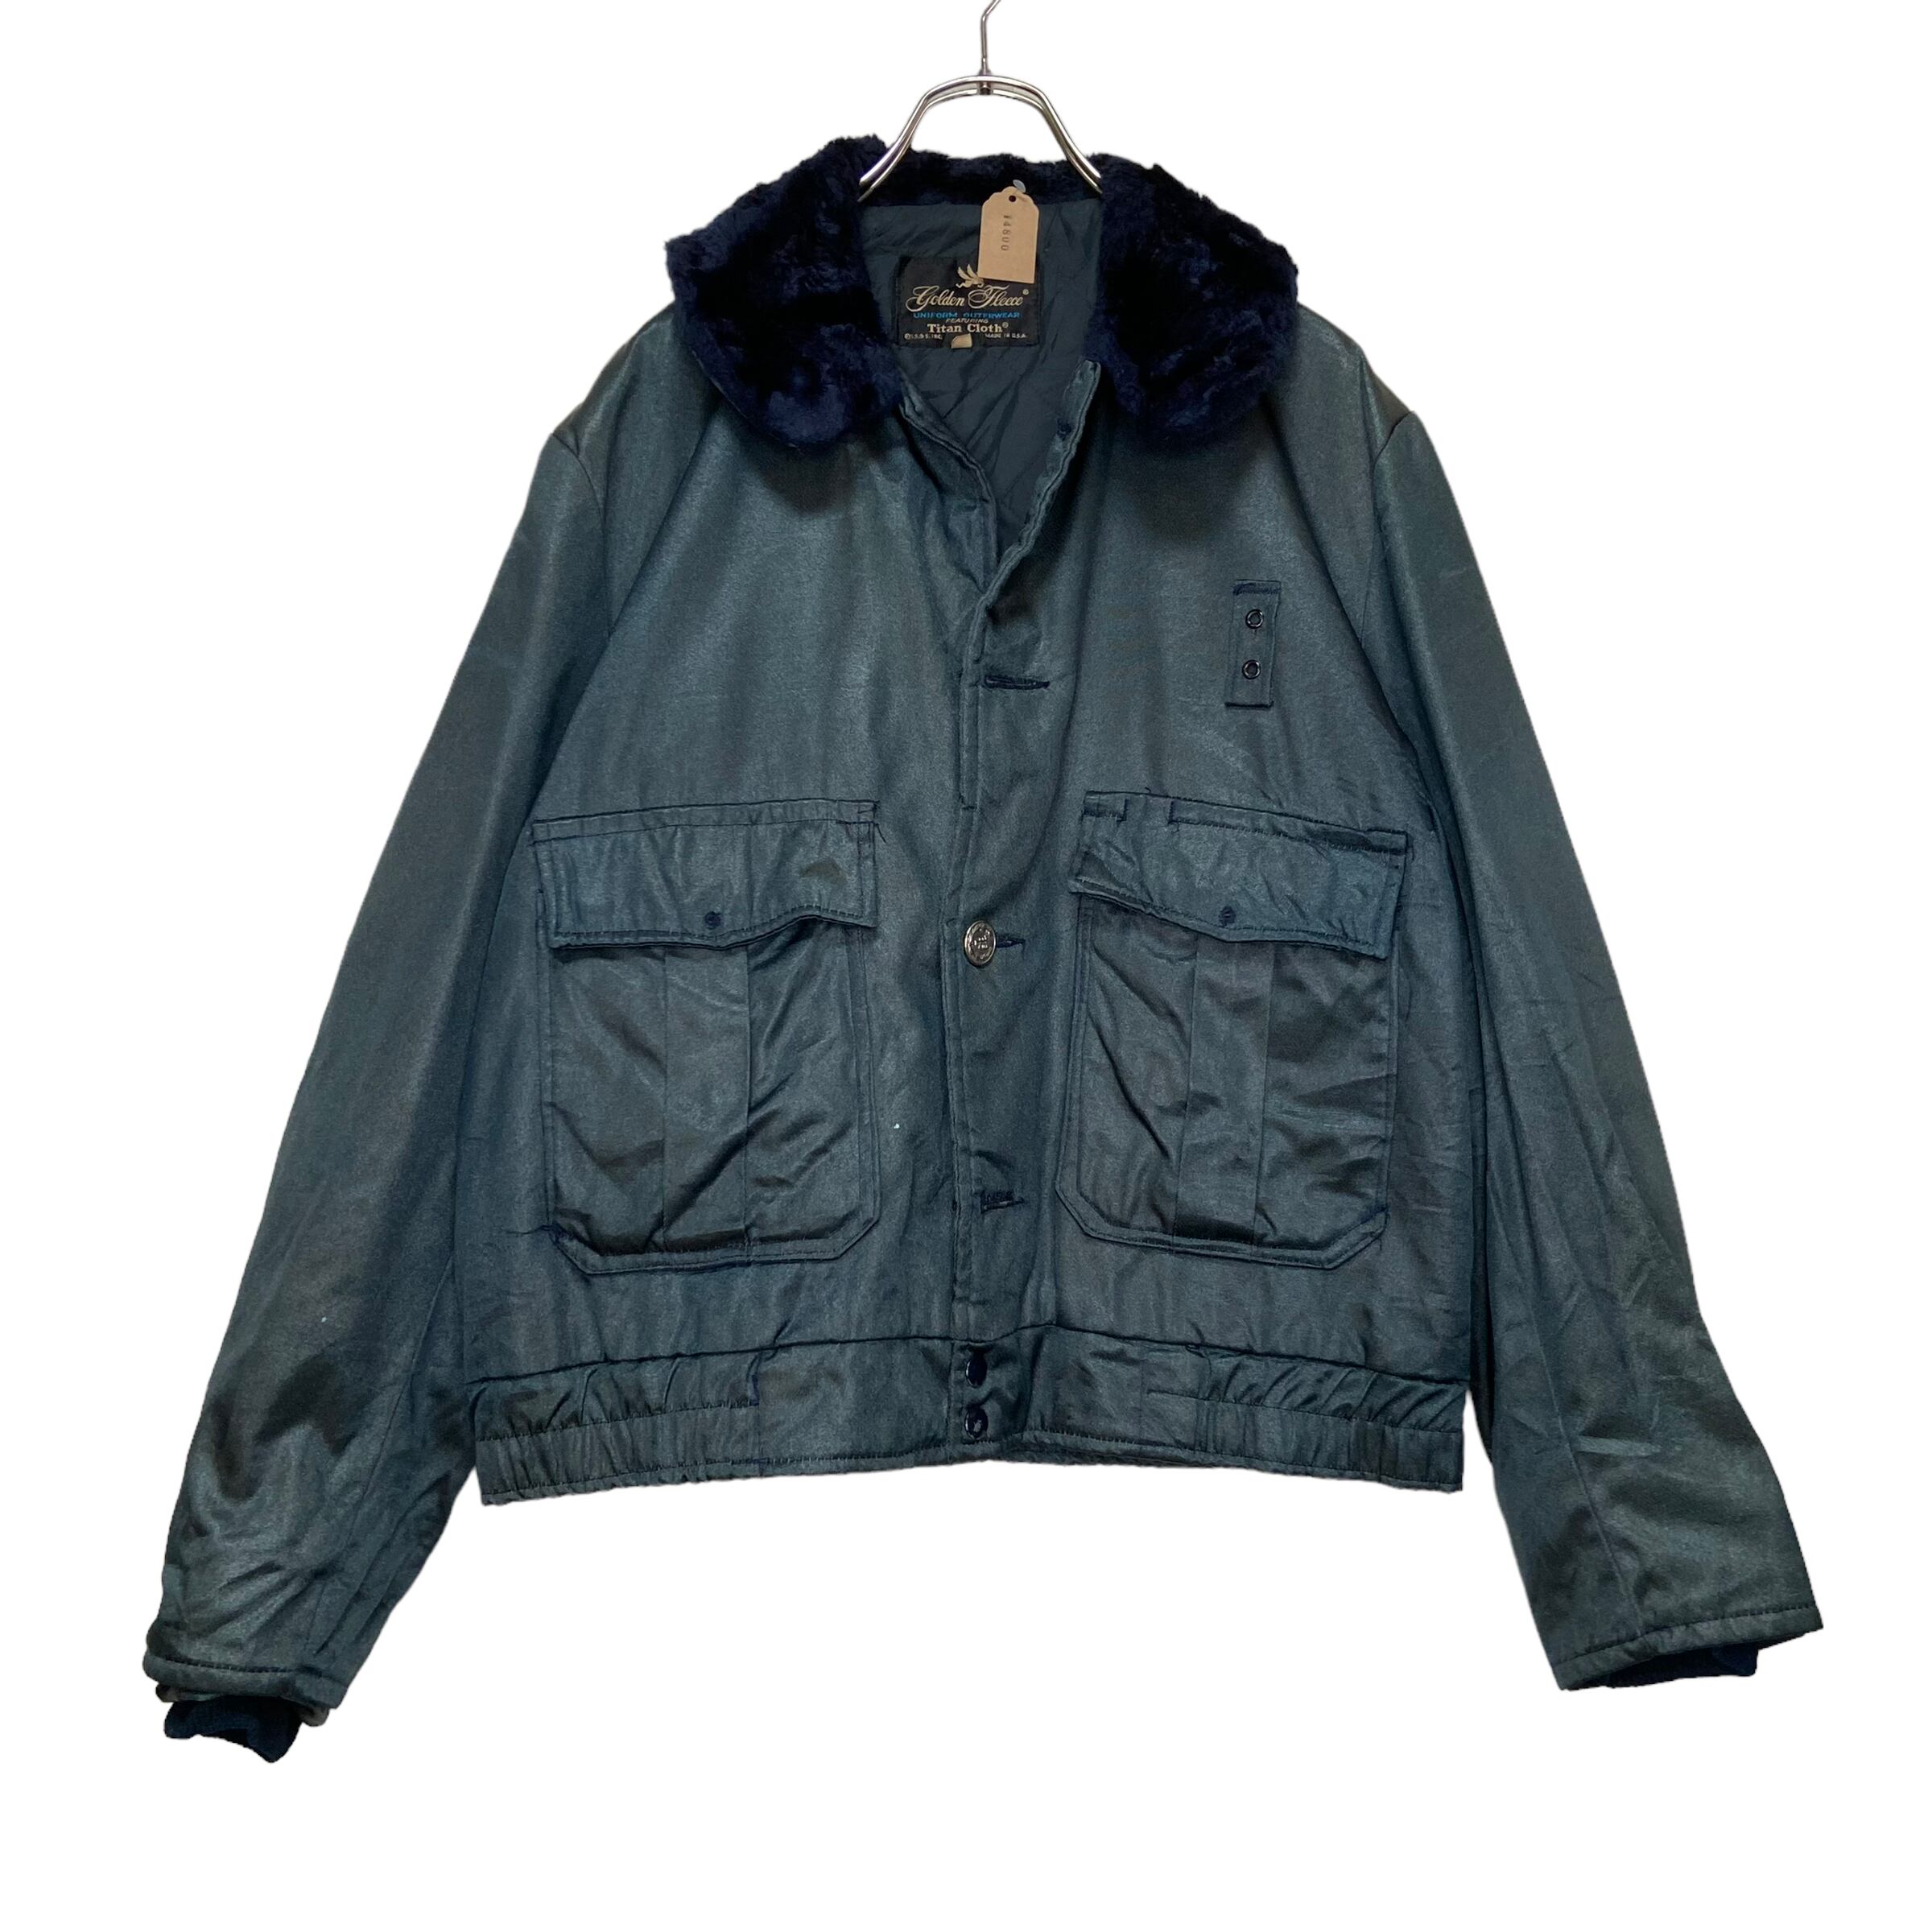 【Made in USA】GOLDEN FLEECE ワークジャケット　M　キルティング　襟ファー | 古着屋OLDGREEN powered by  BASE